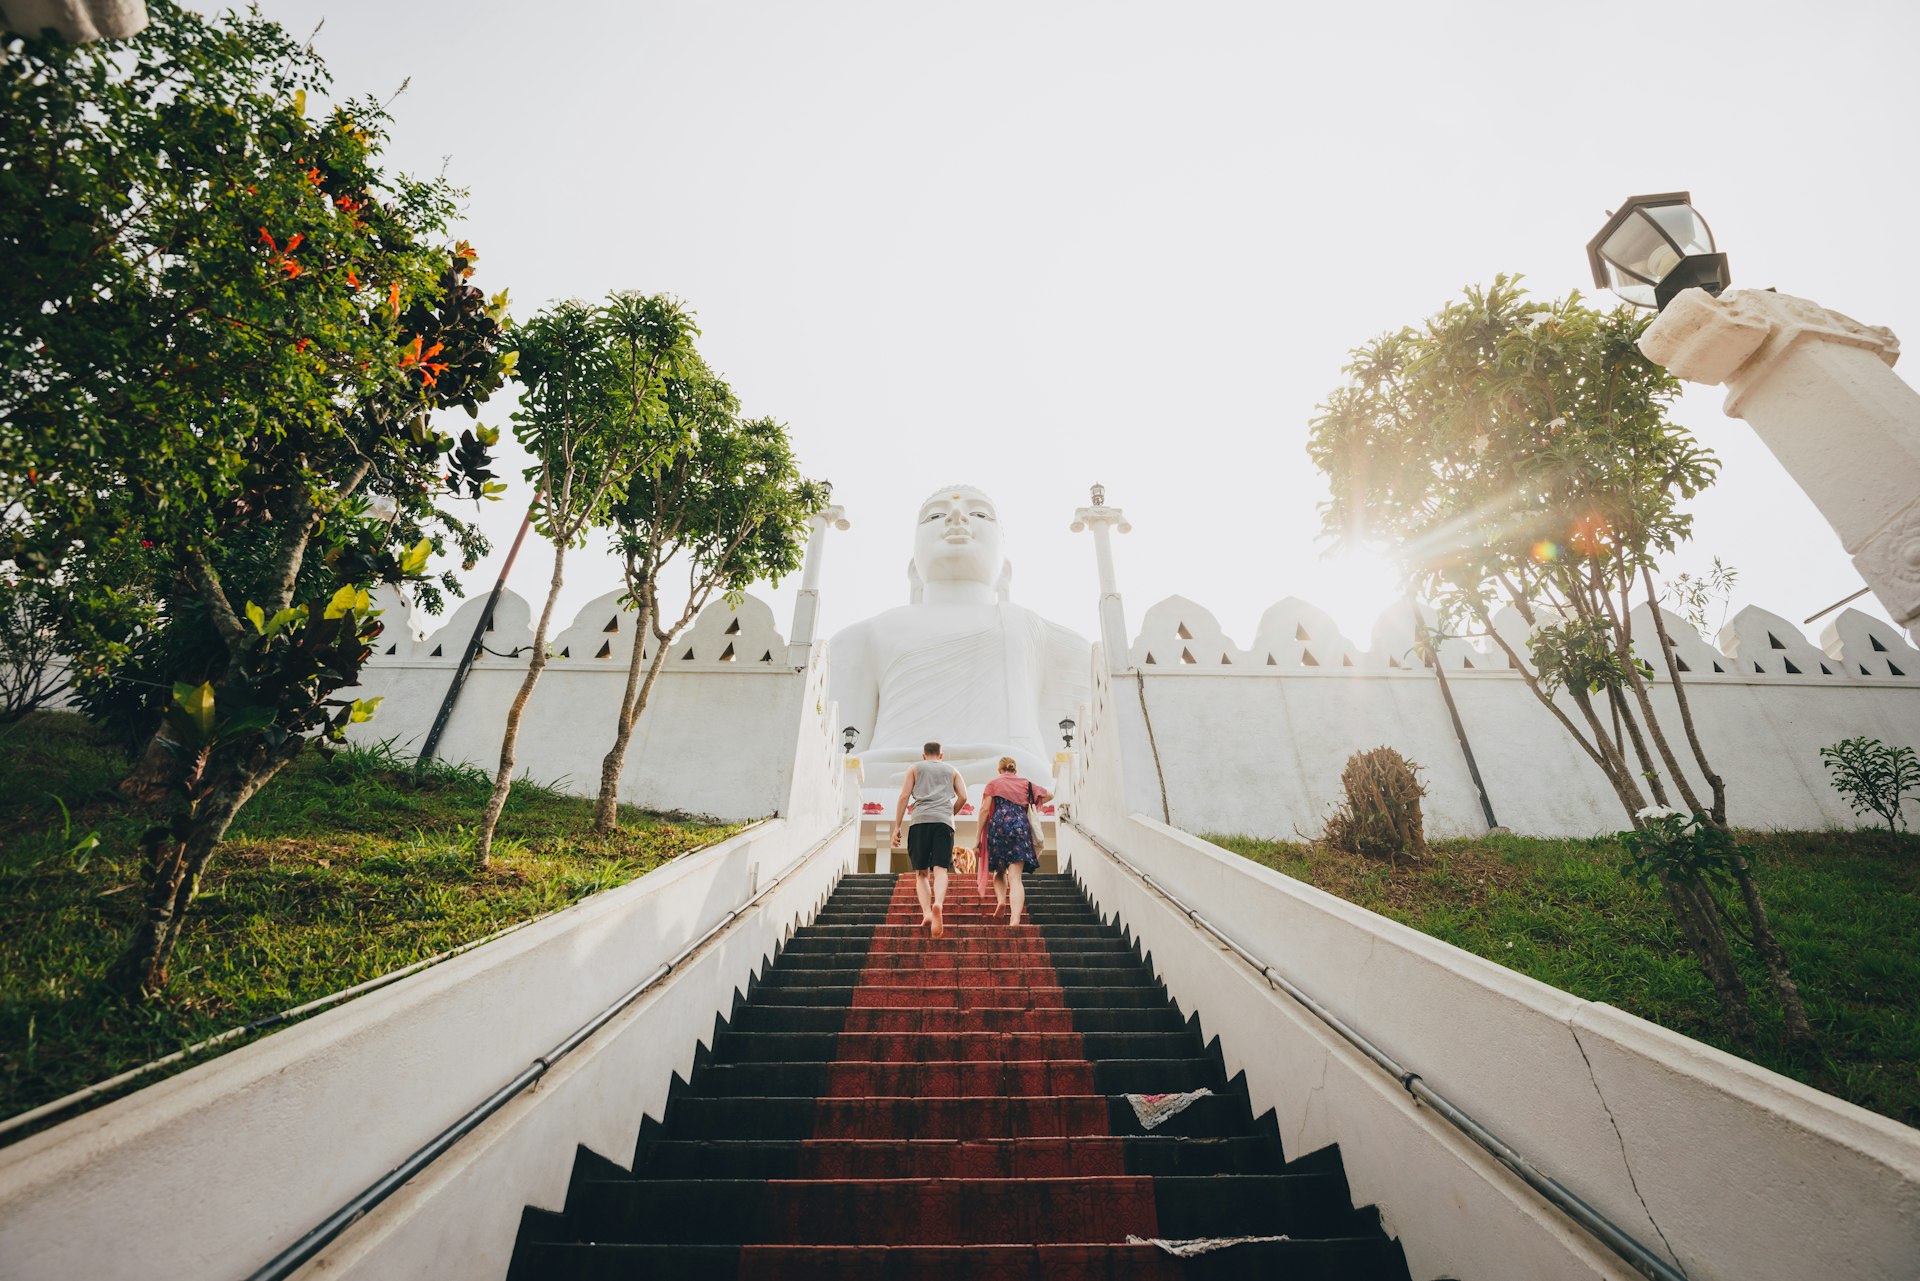 Should you visit Sri Lanka or the Philippines? - Lonely Planet